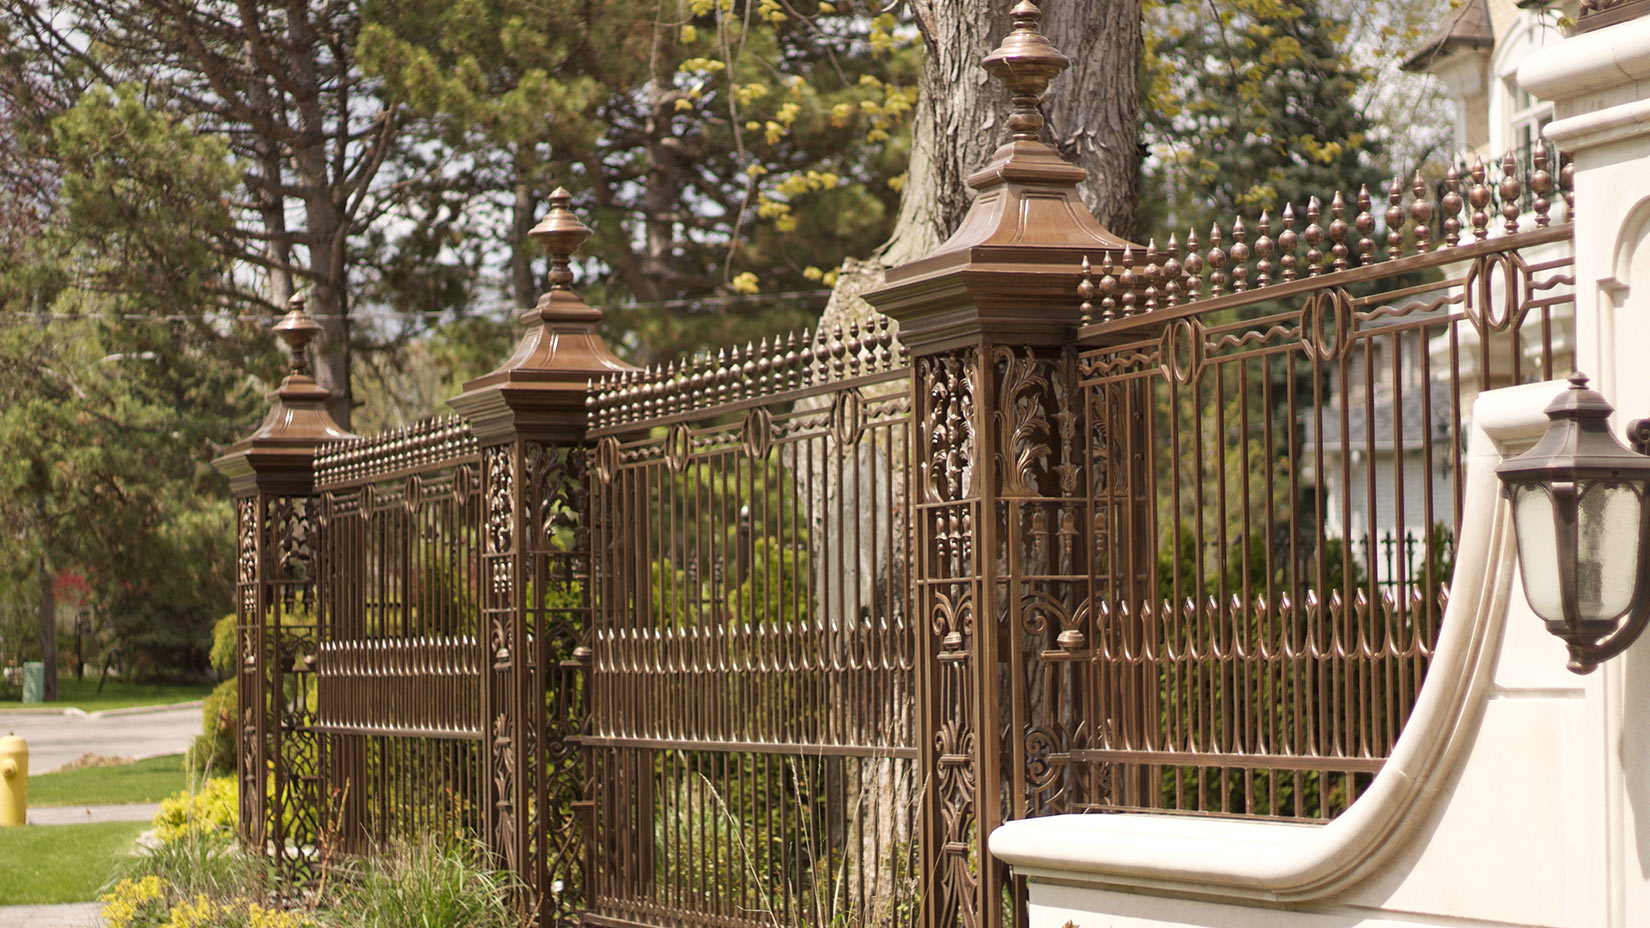 Turn Your Estate into a Royal One with Palace Gates